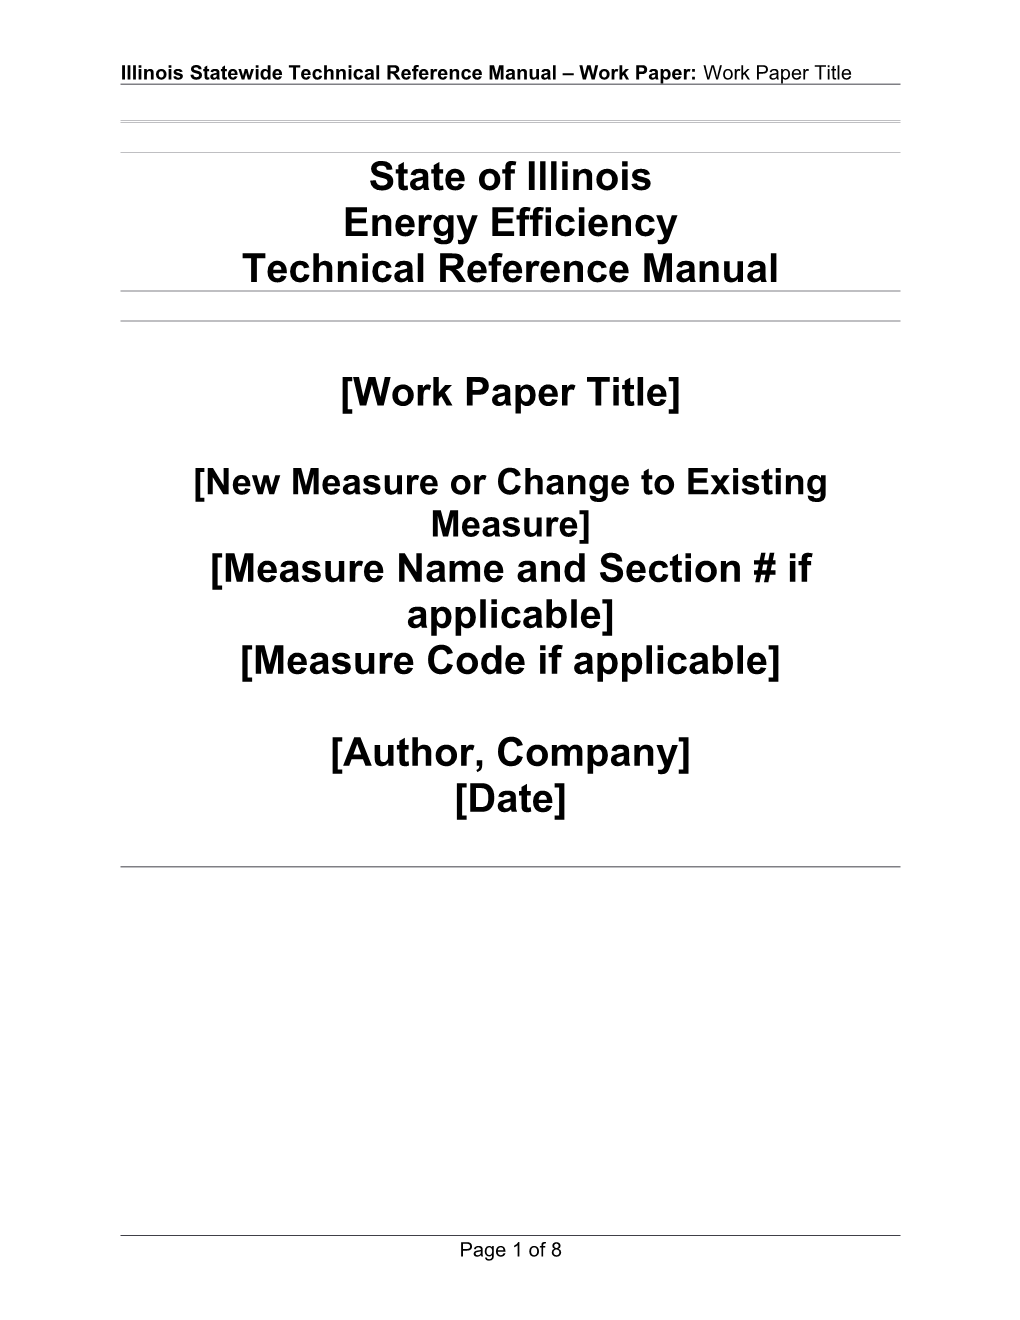 Illinois Statewide Technical Reference Manual Work Paper: Work Paper Title